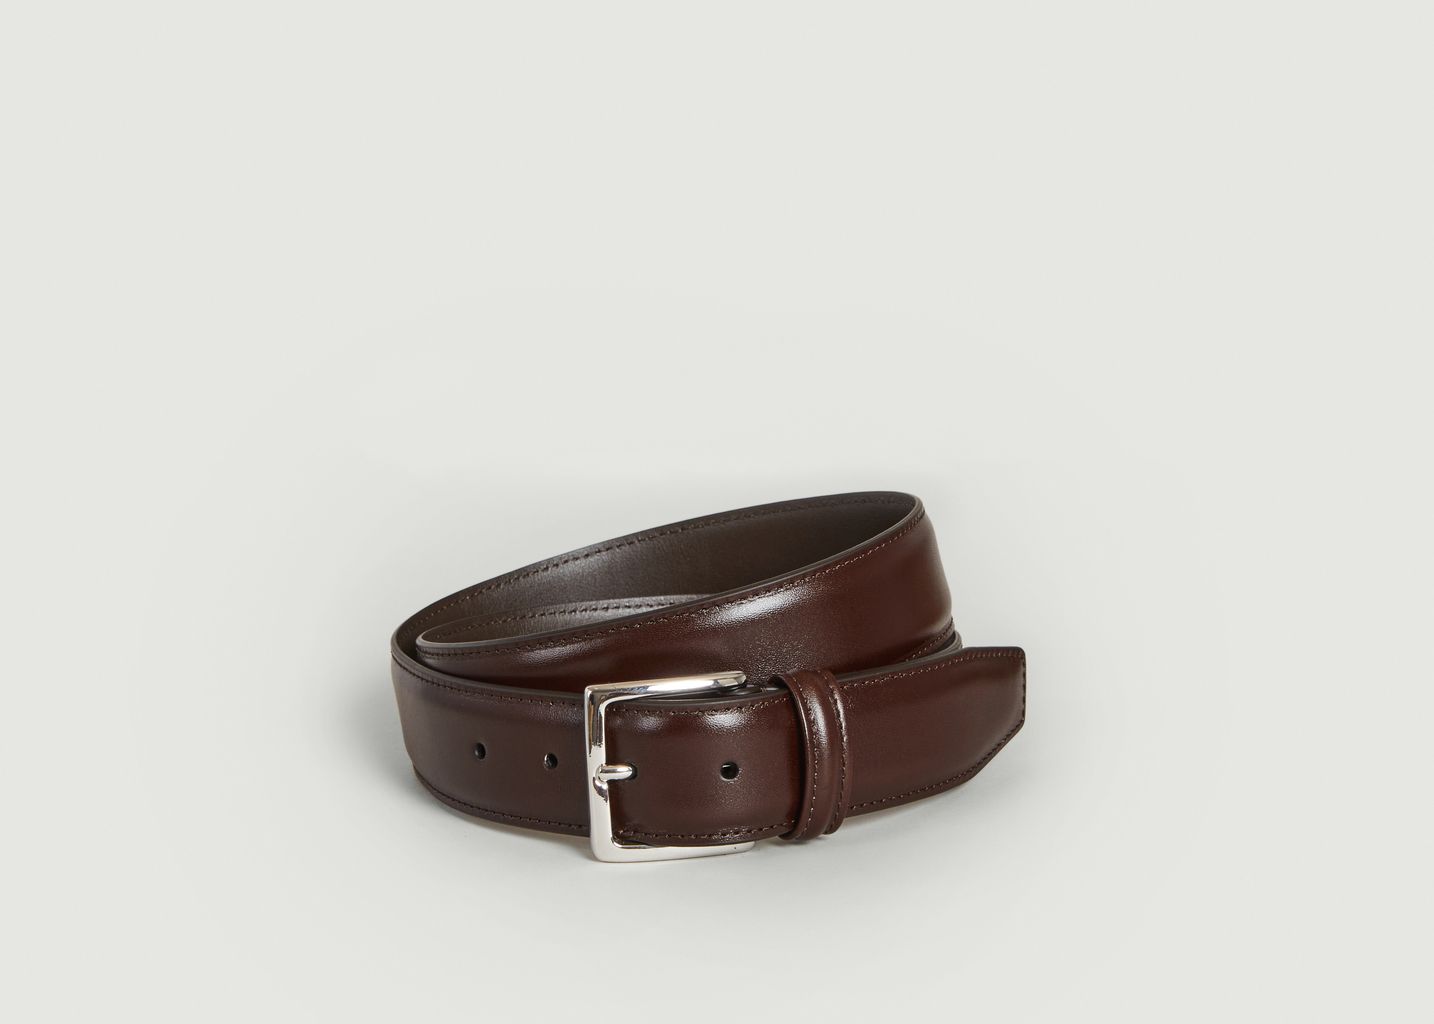 Leather belt - Anderson's